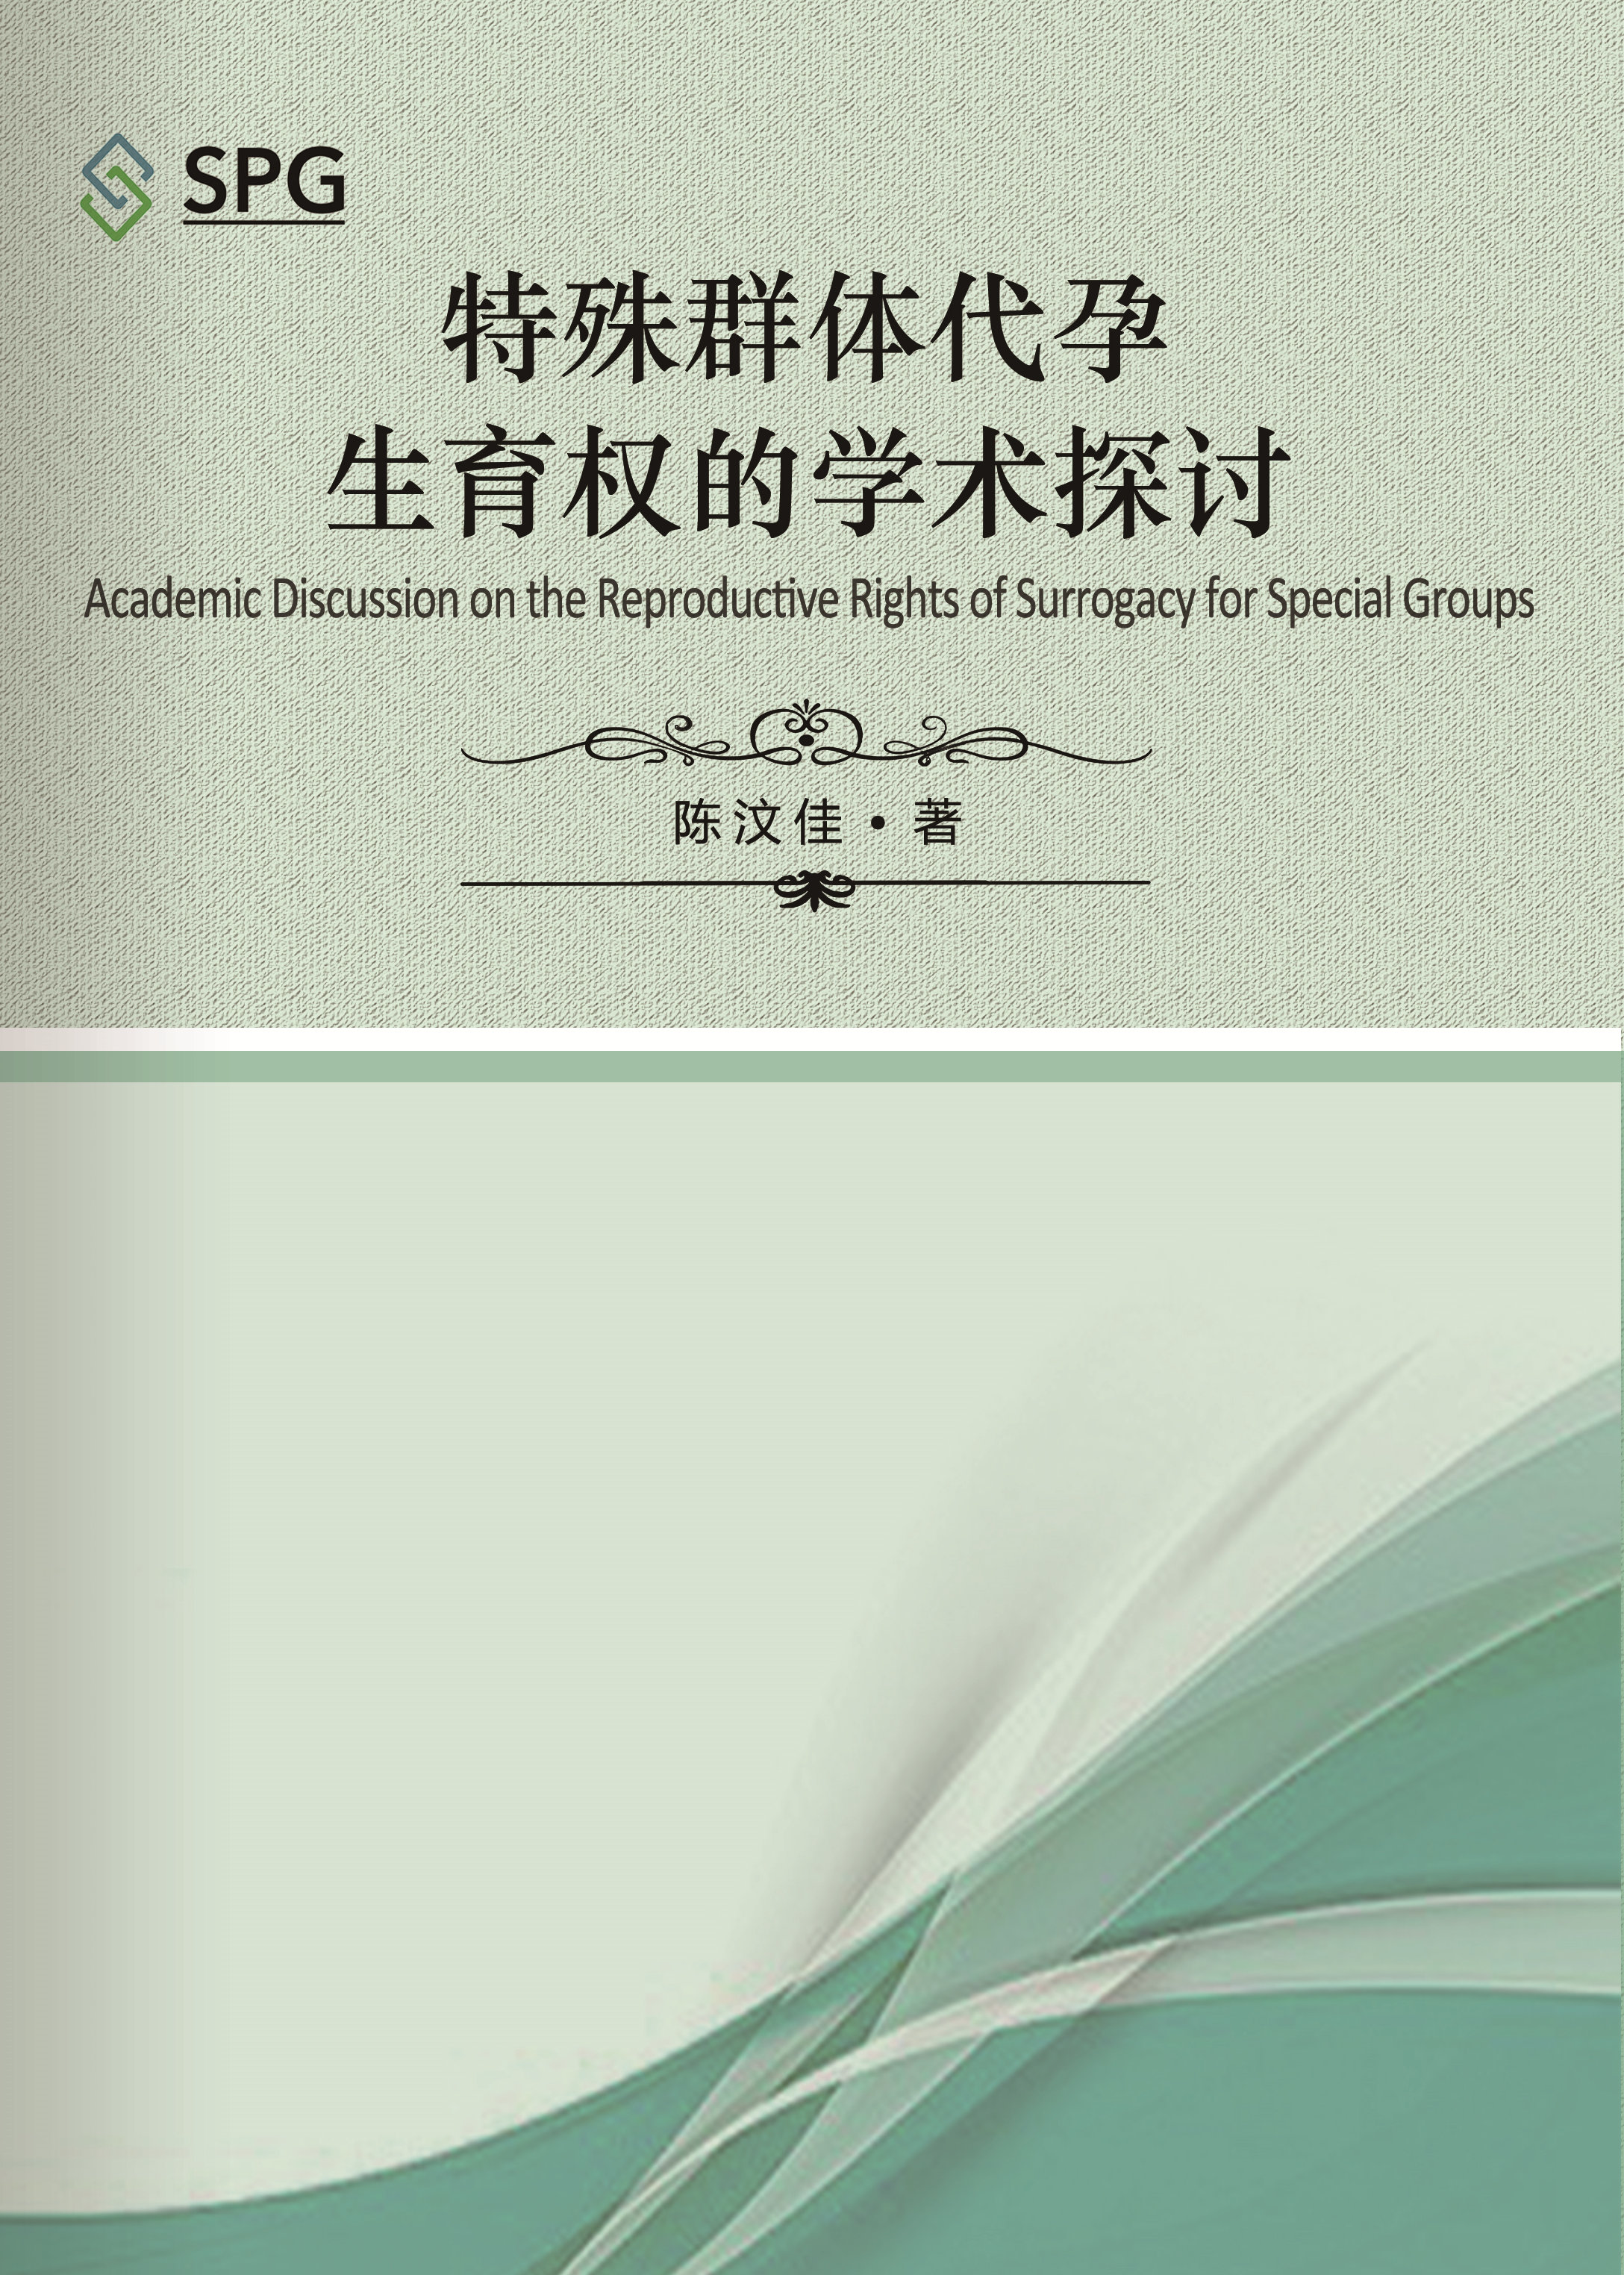 Academic Discussion on the Reproductive Rights of Surrogacy for Special Groups | Scholar Publishing Group